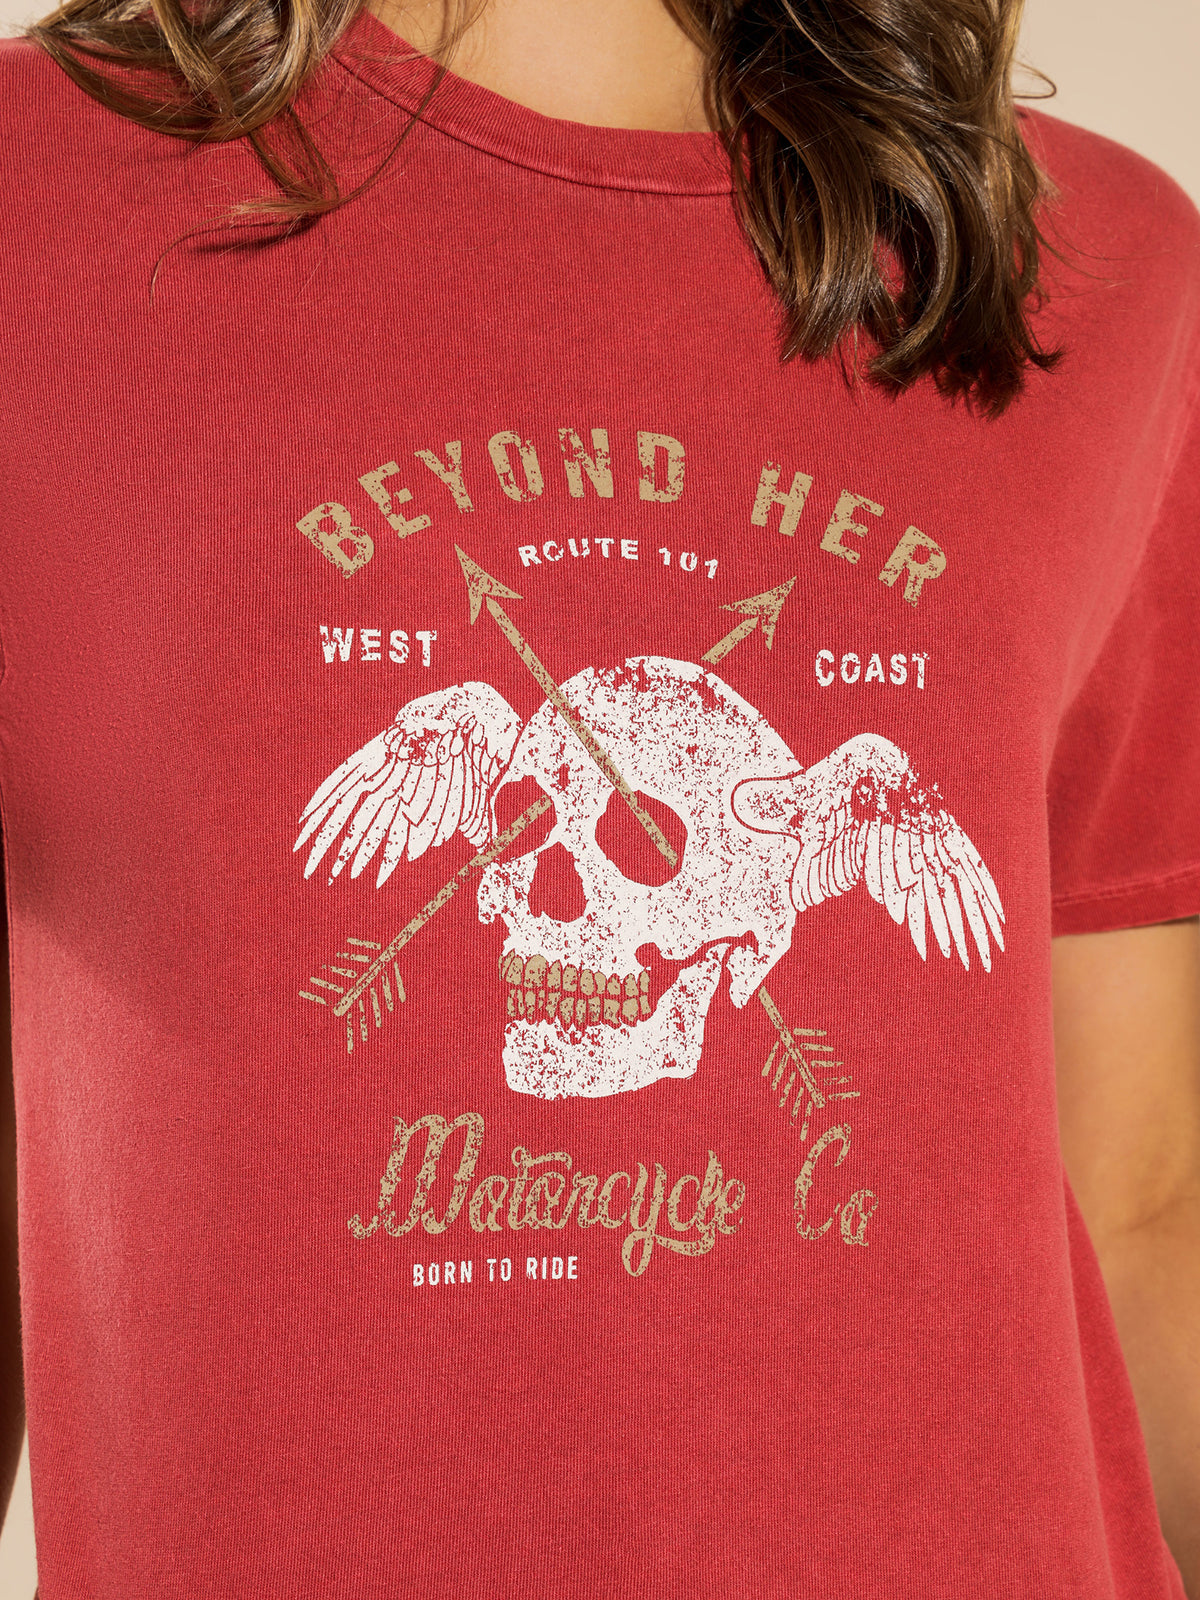 Beyond Motorcycles T-Shirt in Red